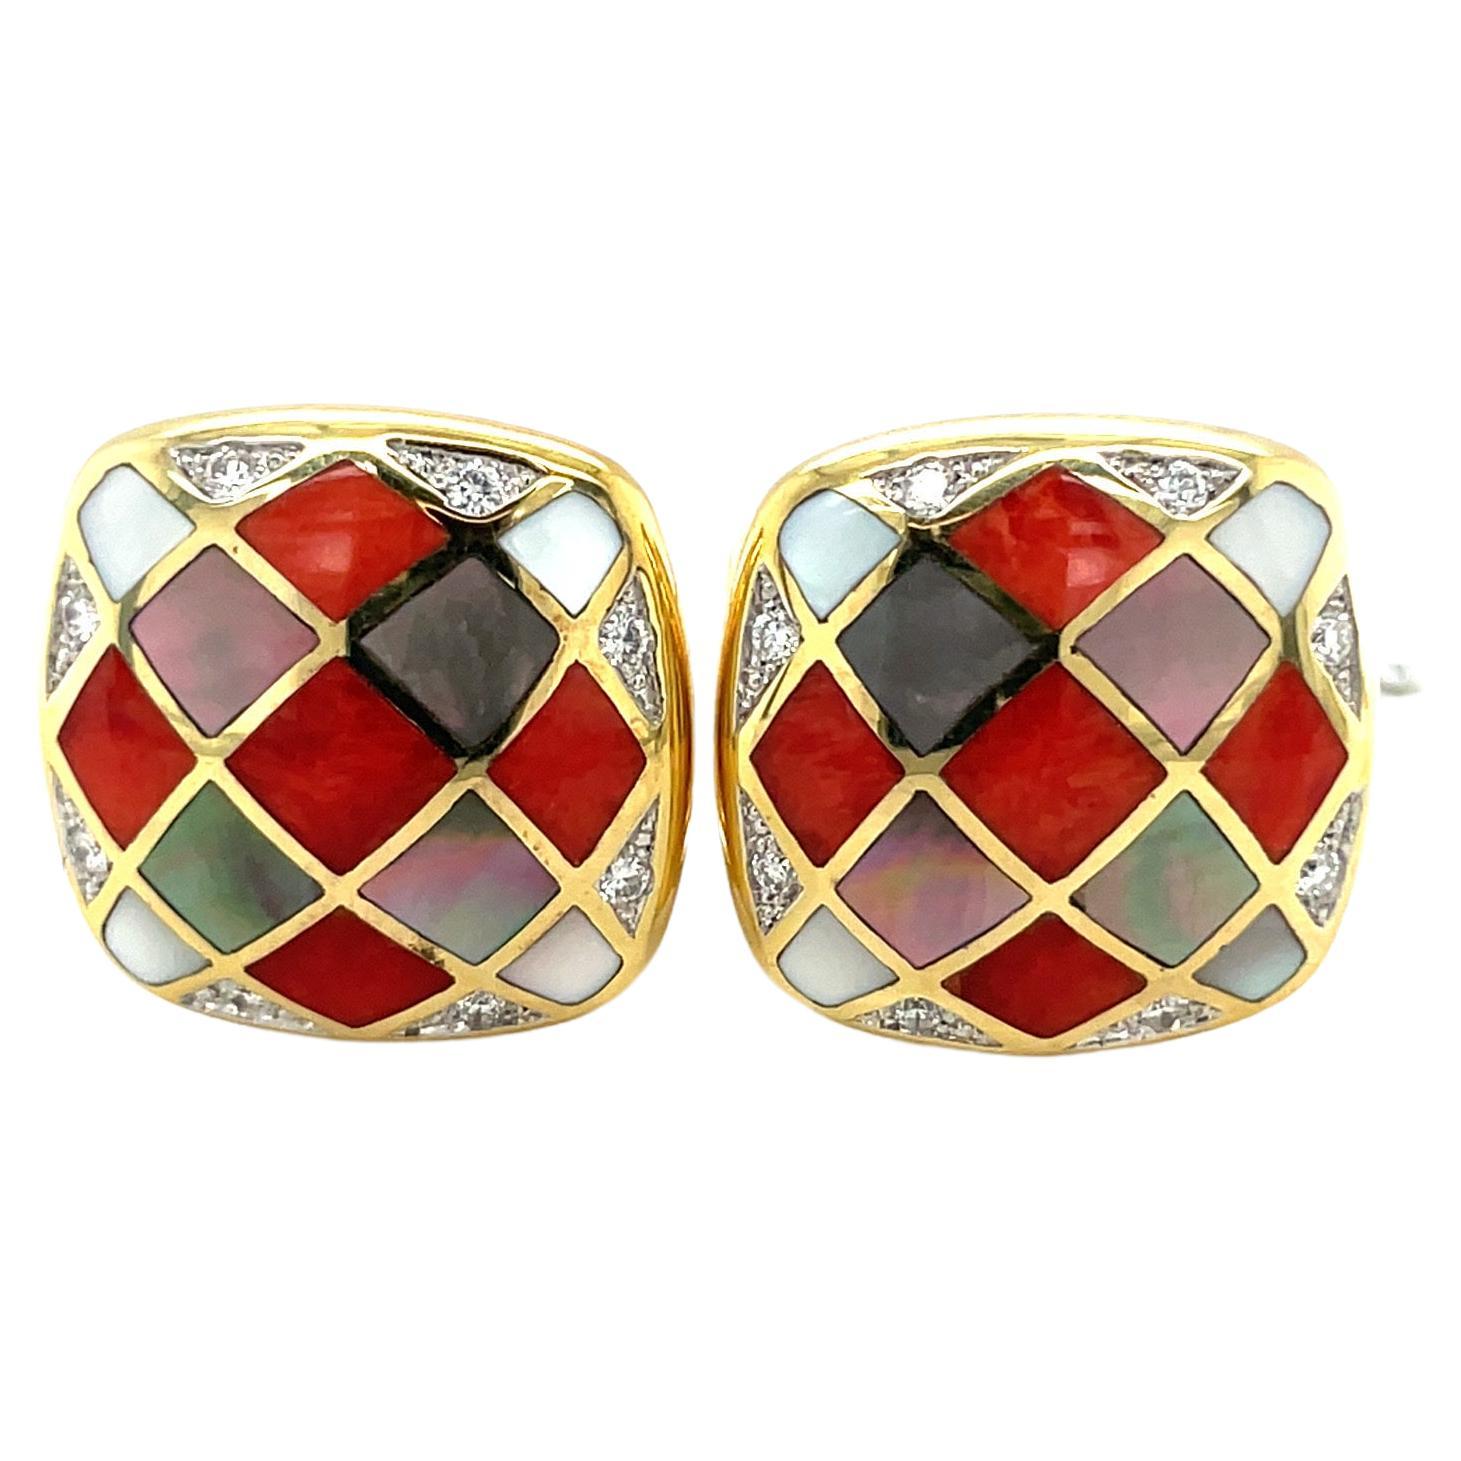 Asch Grossbardt 18KT YG Earrings with Coral, Mother of Pearl & 0.16Ct Diamonds For Sale